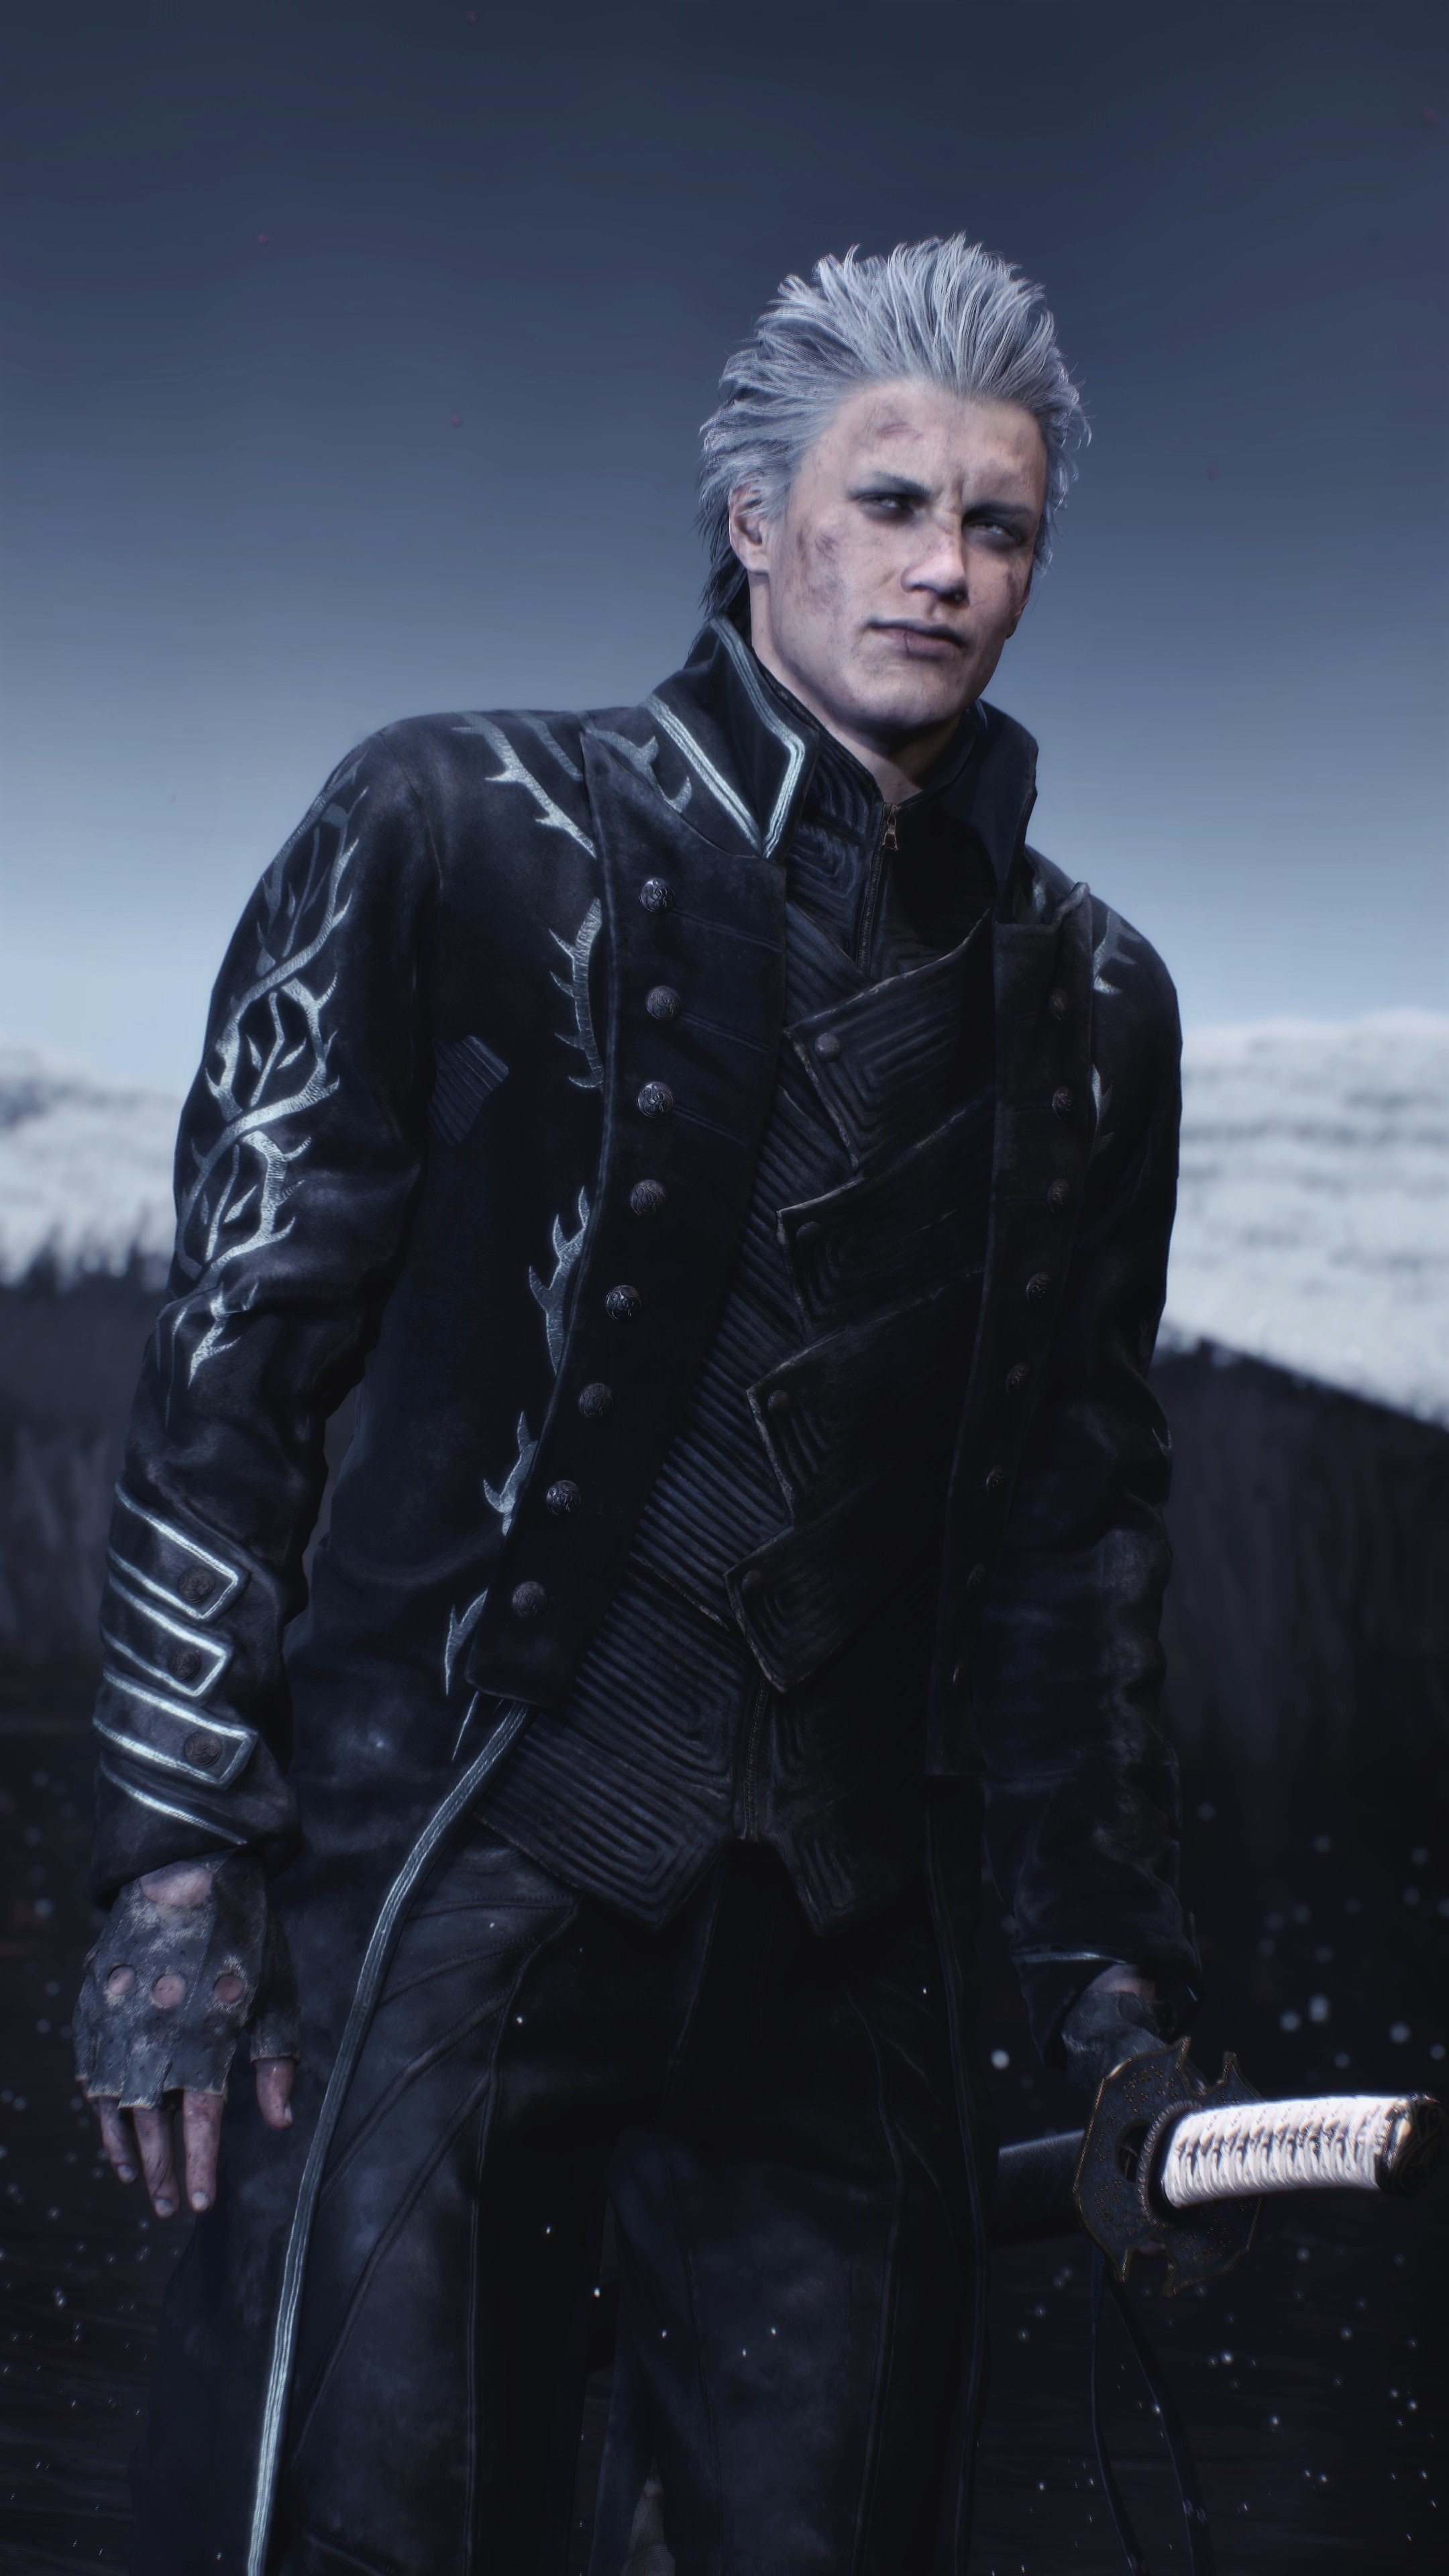 Can we take a moment to appreciate just how damn good DMC 5's character  models are?